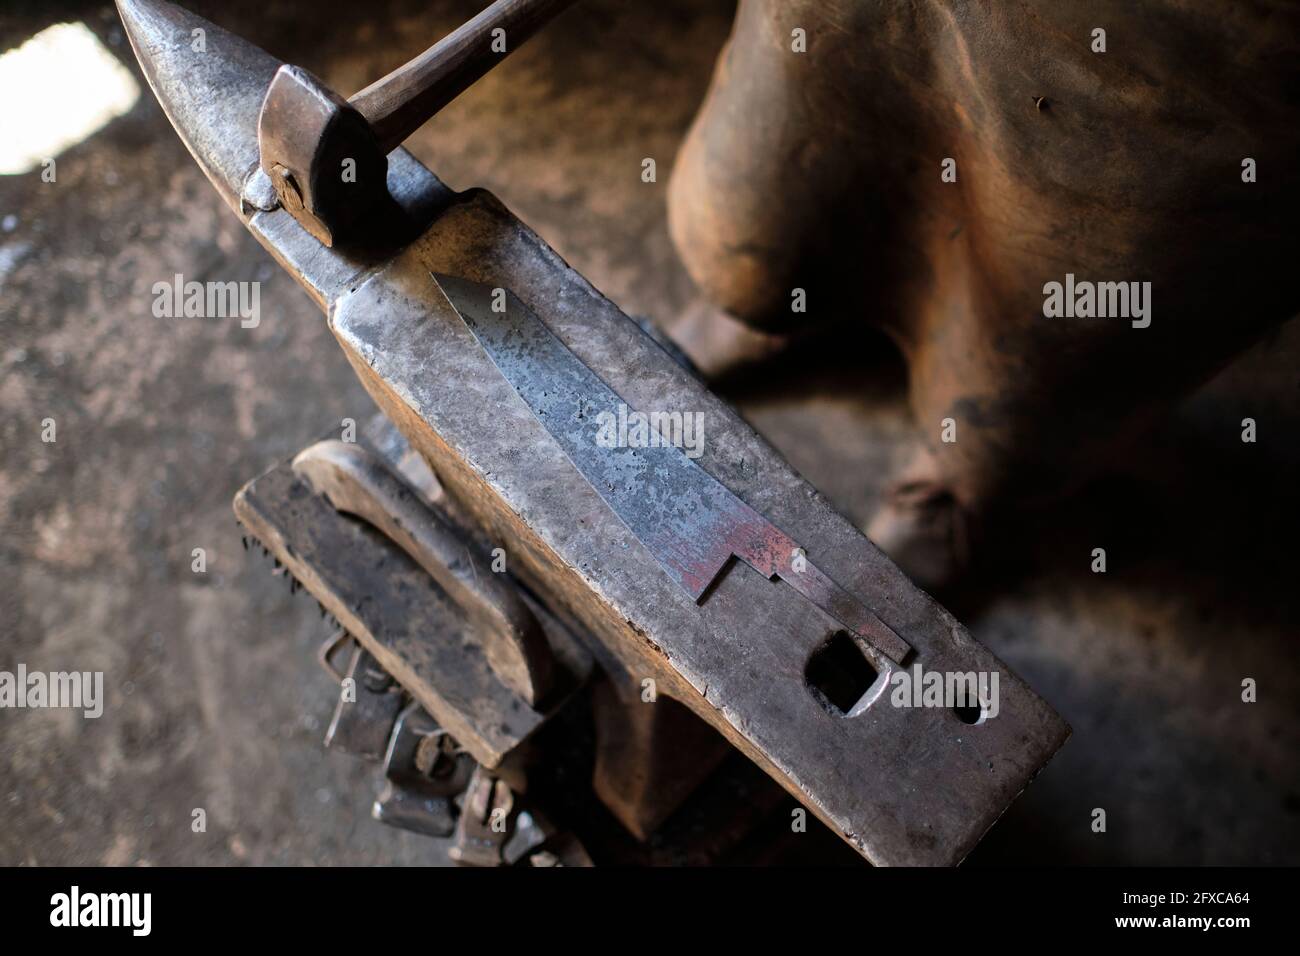 Male metal worker standing by anvil at workshop Stock Photo